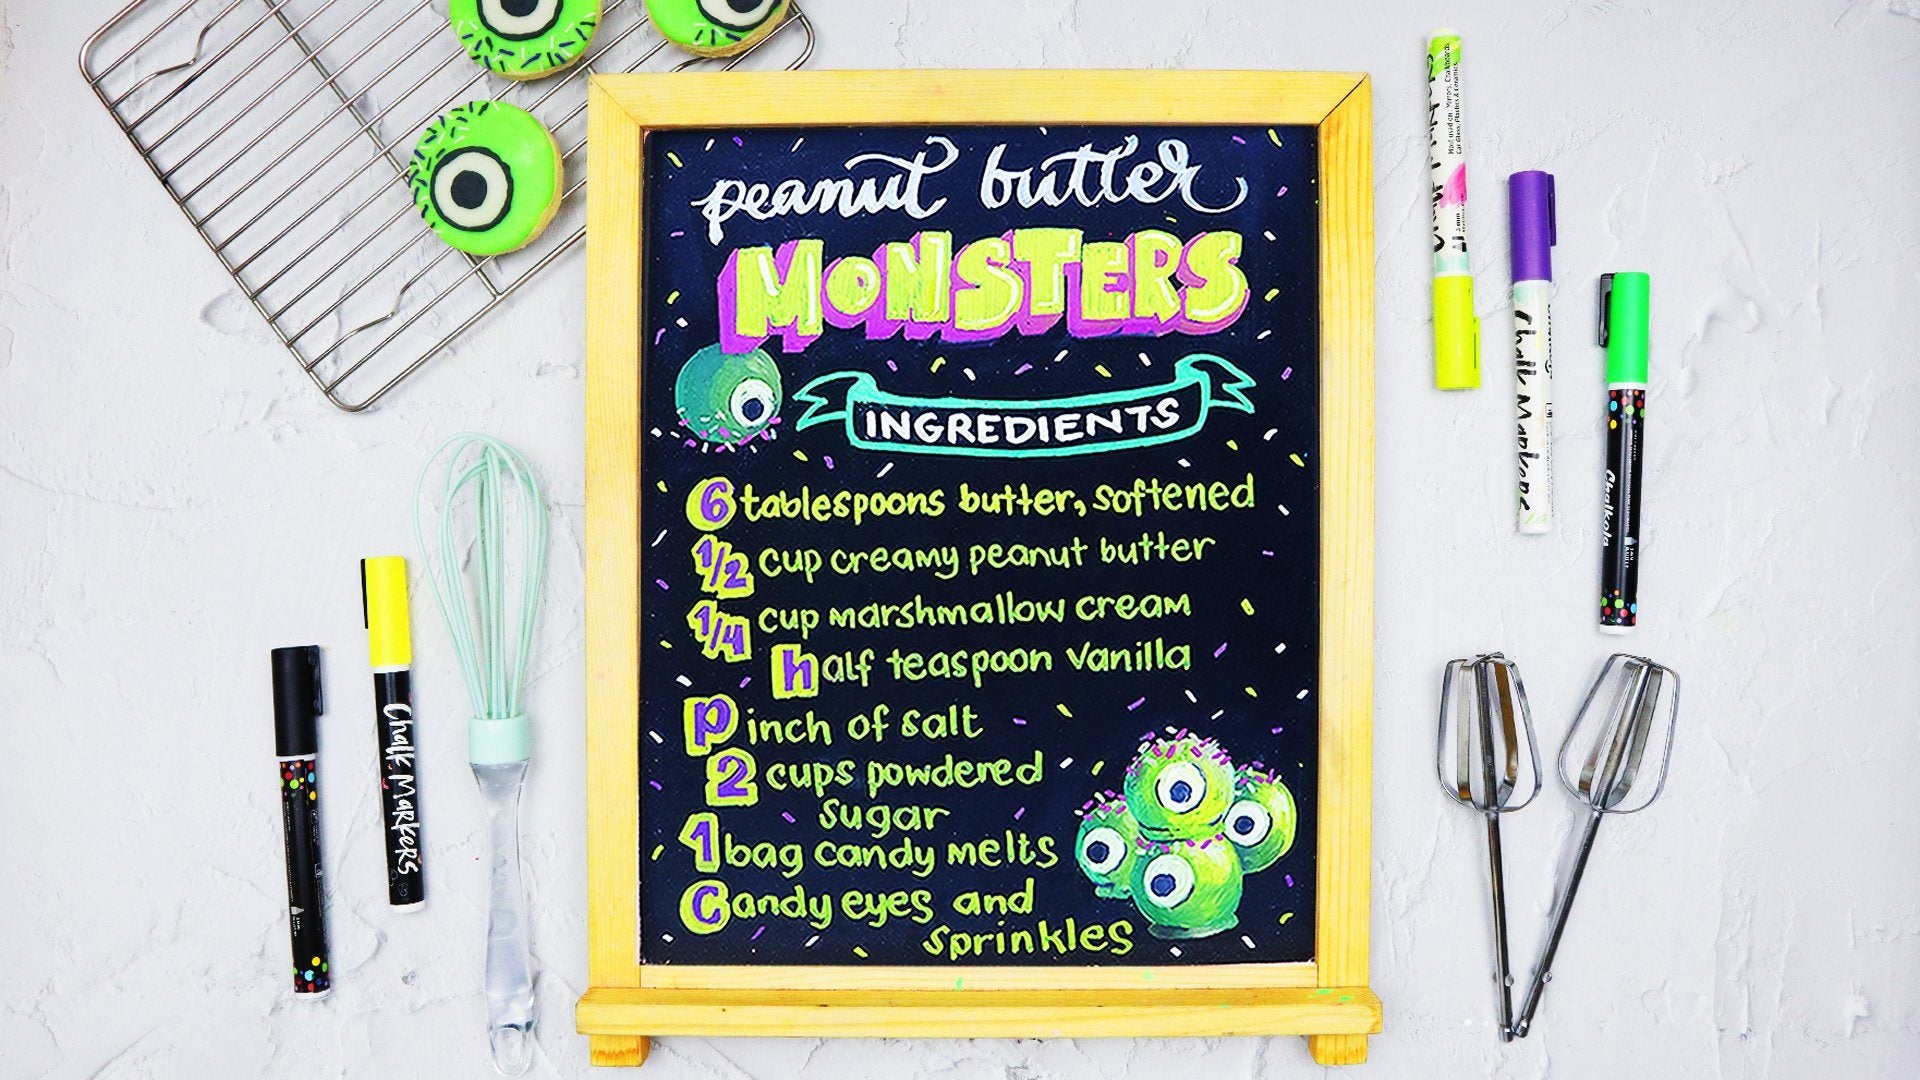 How to Make a Recipe Board for Halloween Using Chalk Markers and Chalkboard | Chalkola Art Supply